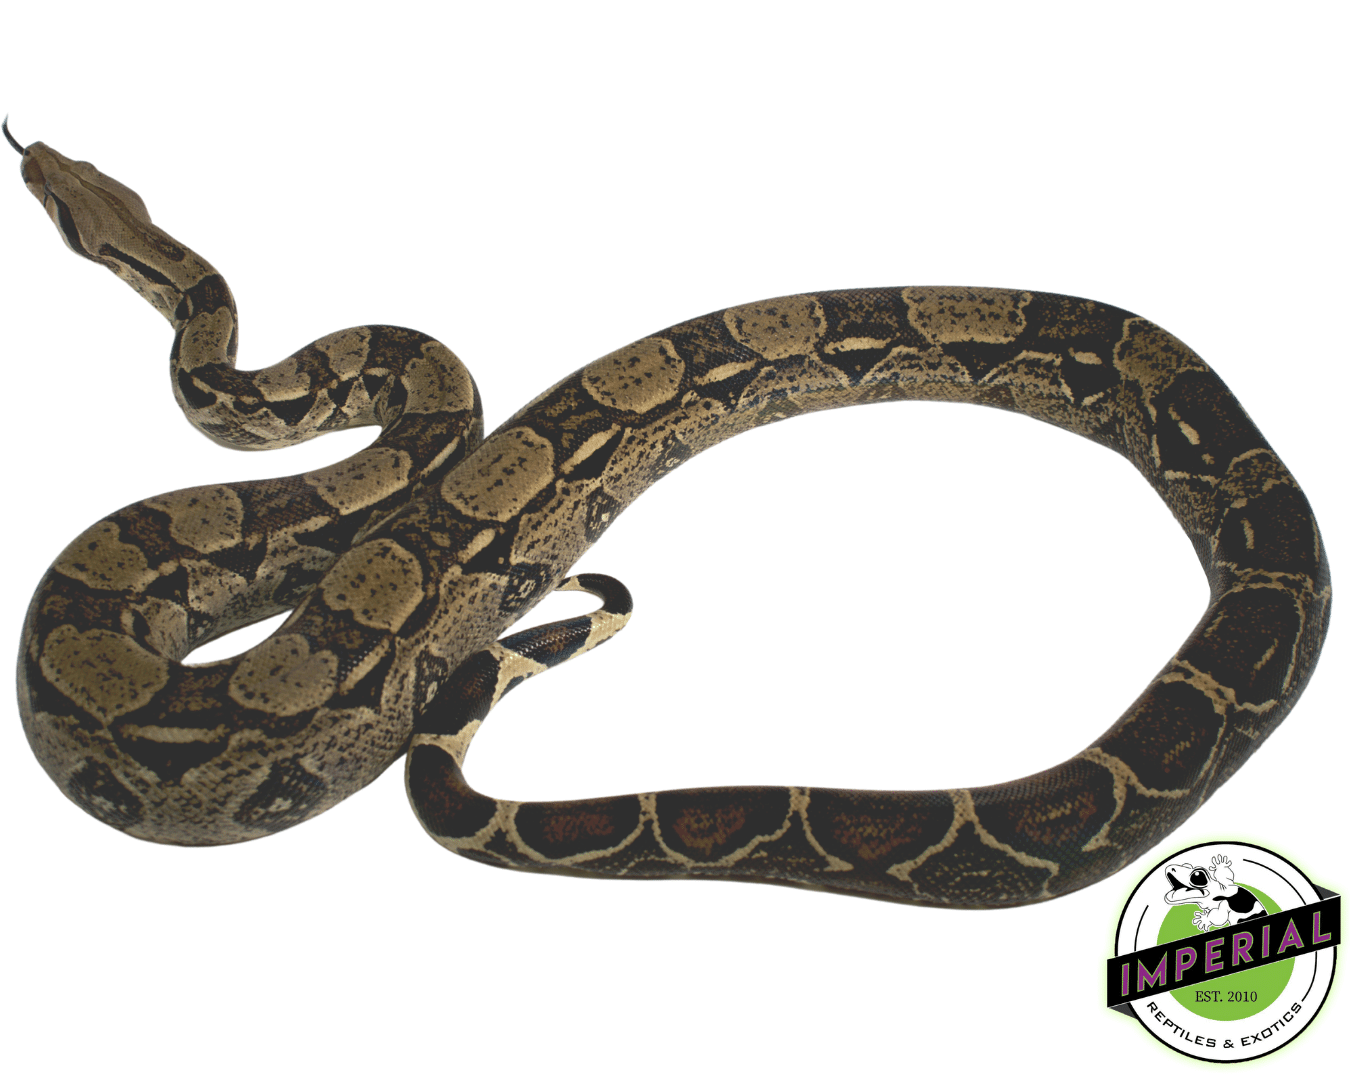 boa constrictor for sale, buy reptiles online at cheap prices